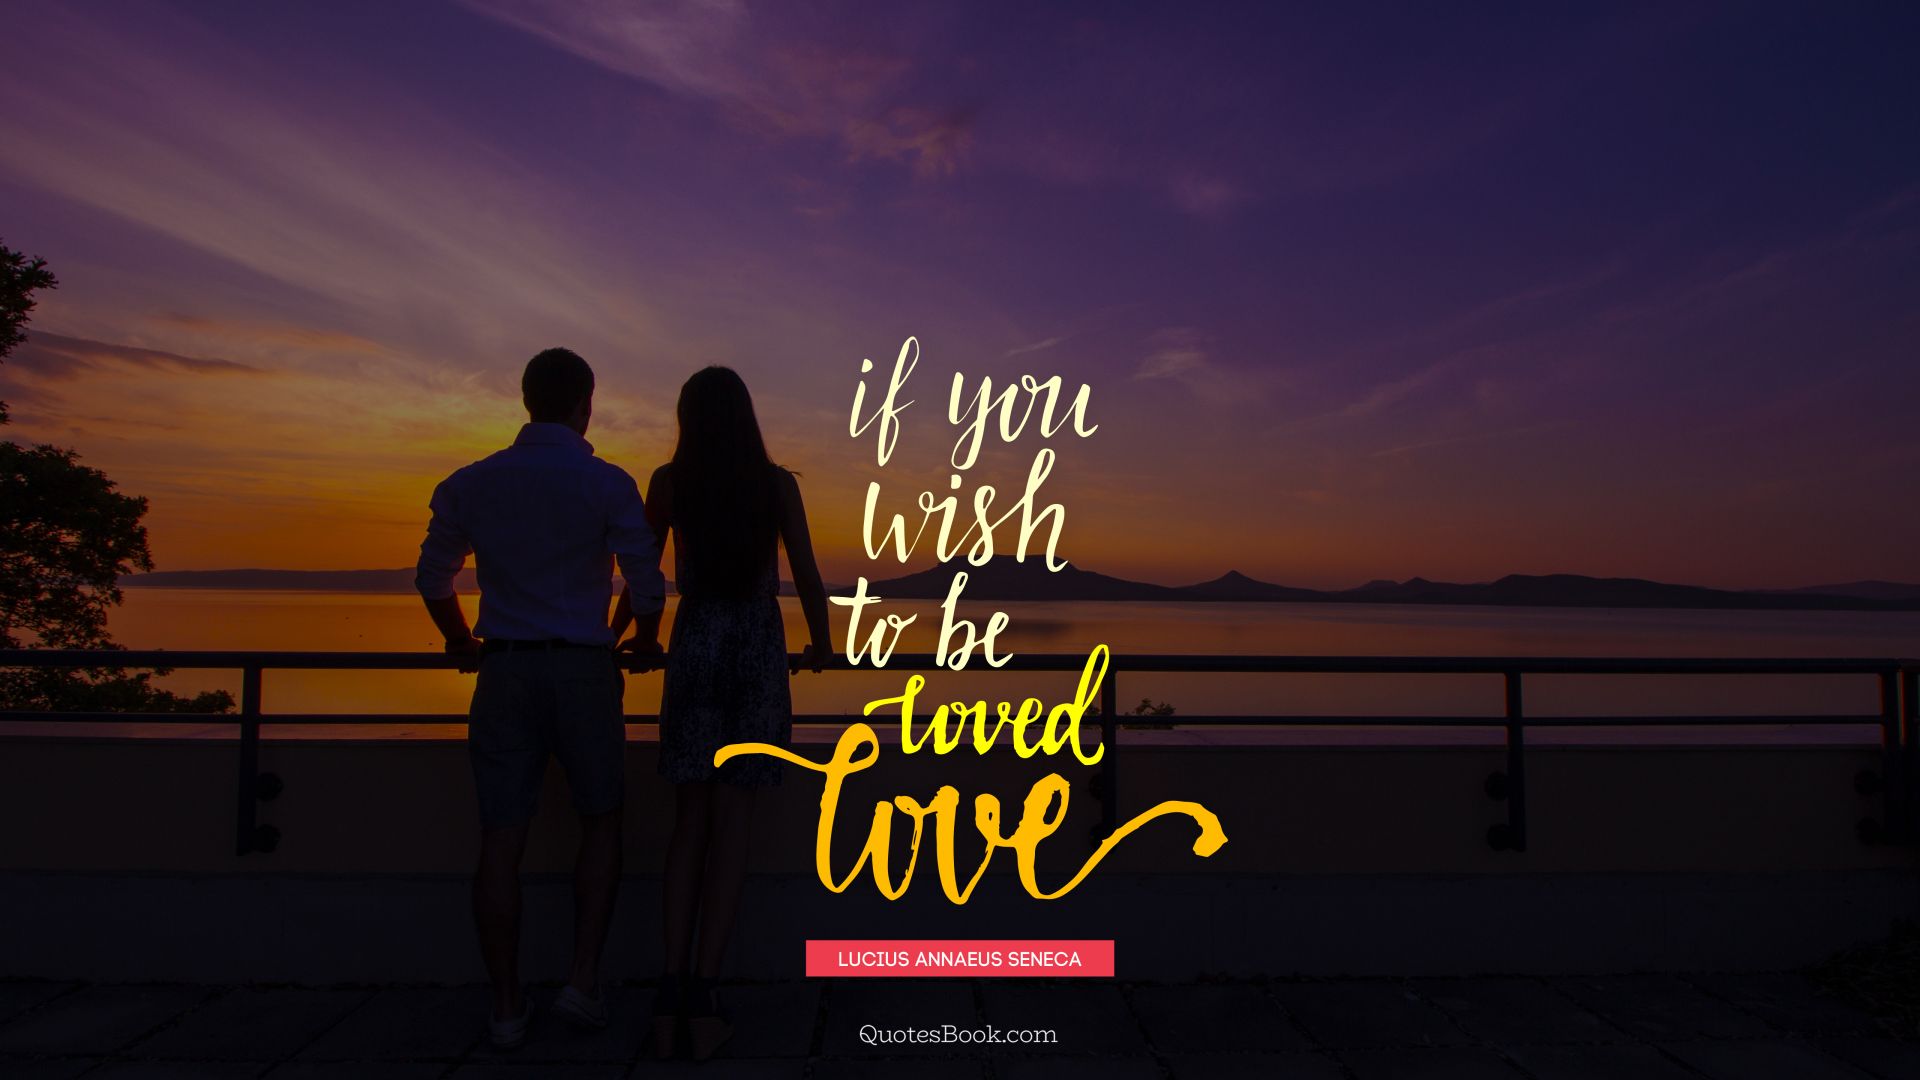 If you wish to be loved love. - Quote by Lucius Annaeus Seneca